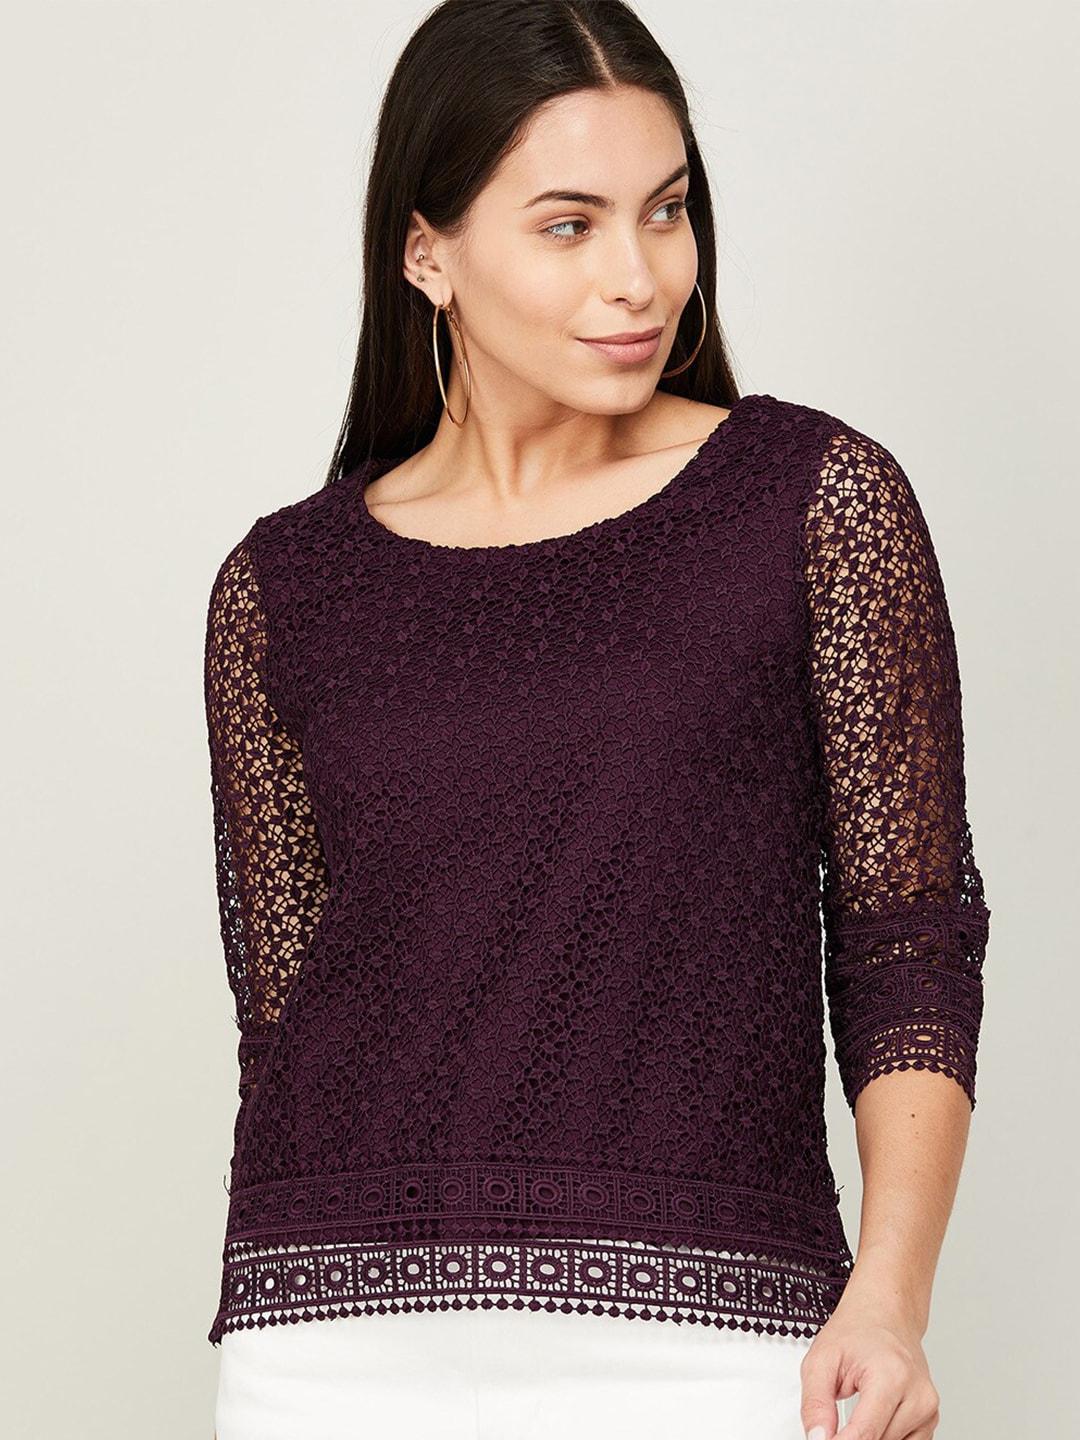 code by lifestyle purple top